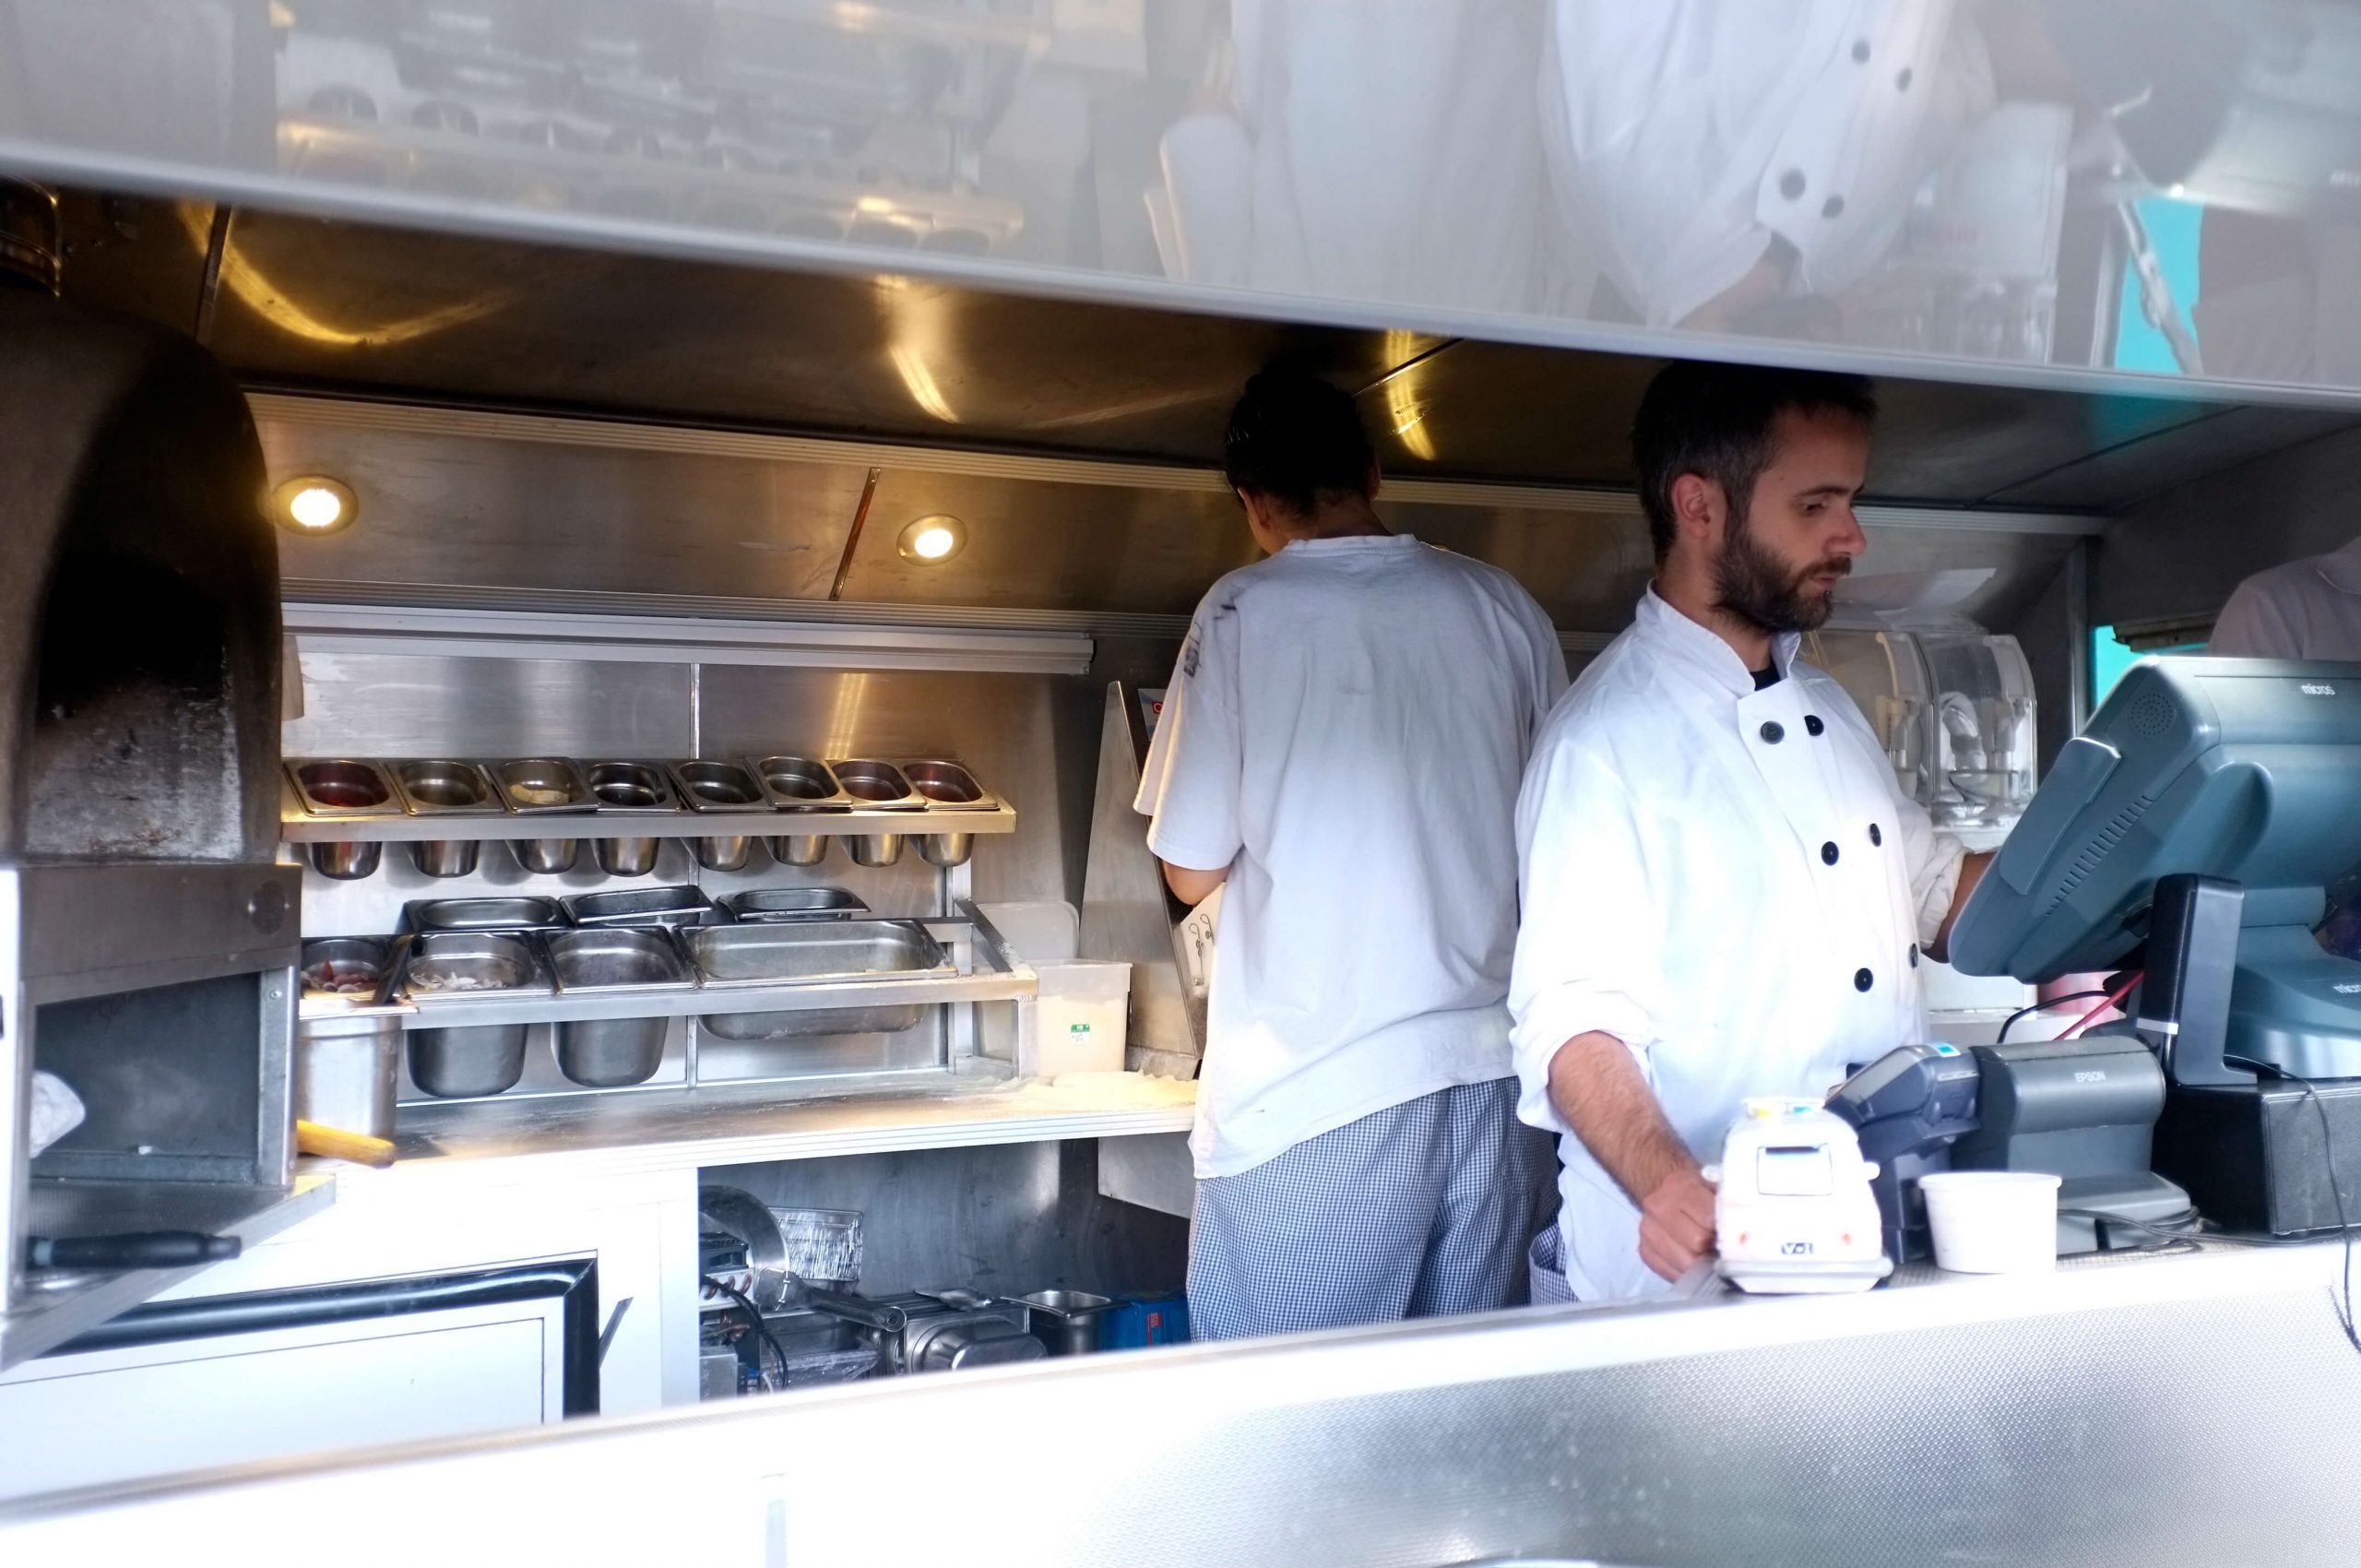 Moving Up from the Food Truck? Here Are Some Tax Topics to Consider